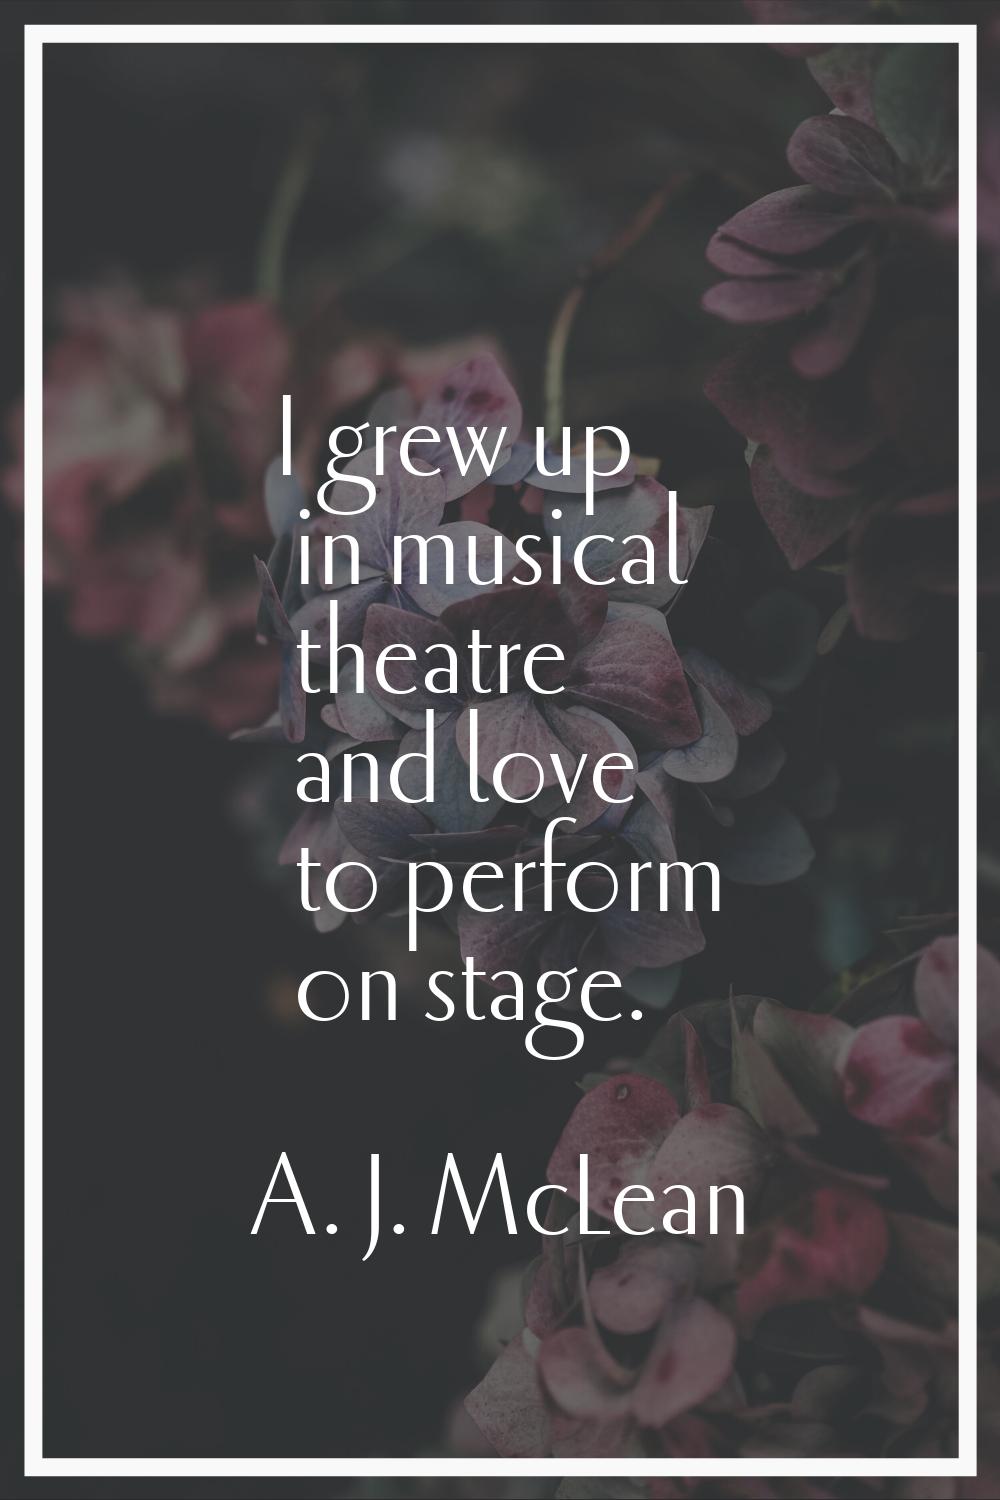 I grew up in musical theatre and love to perform on stage.